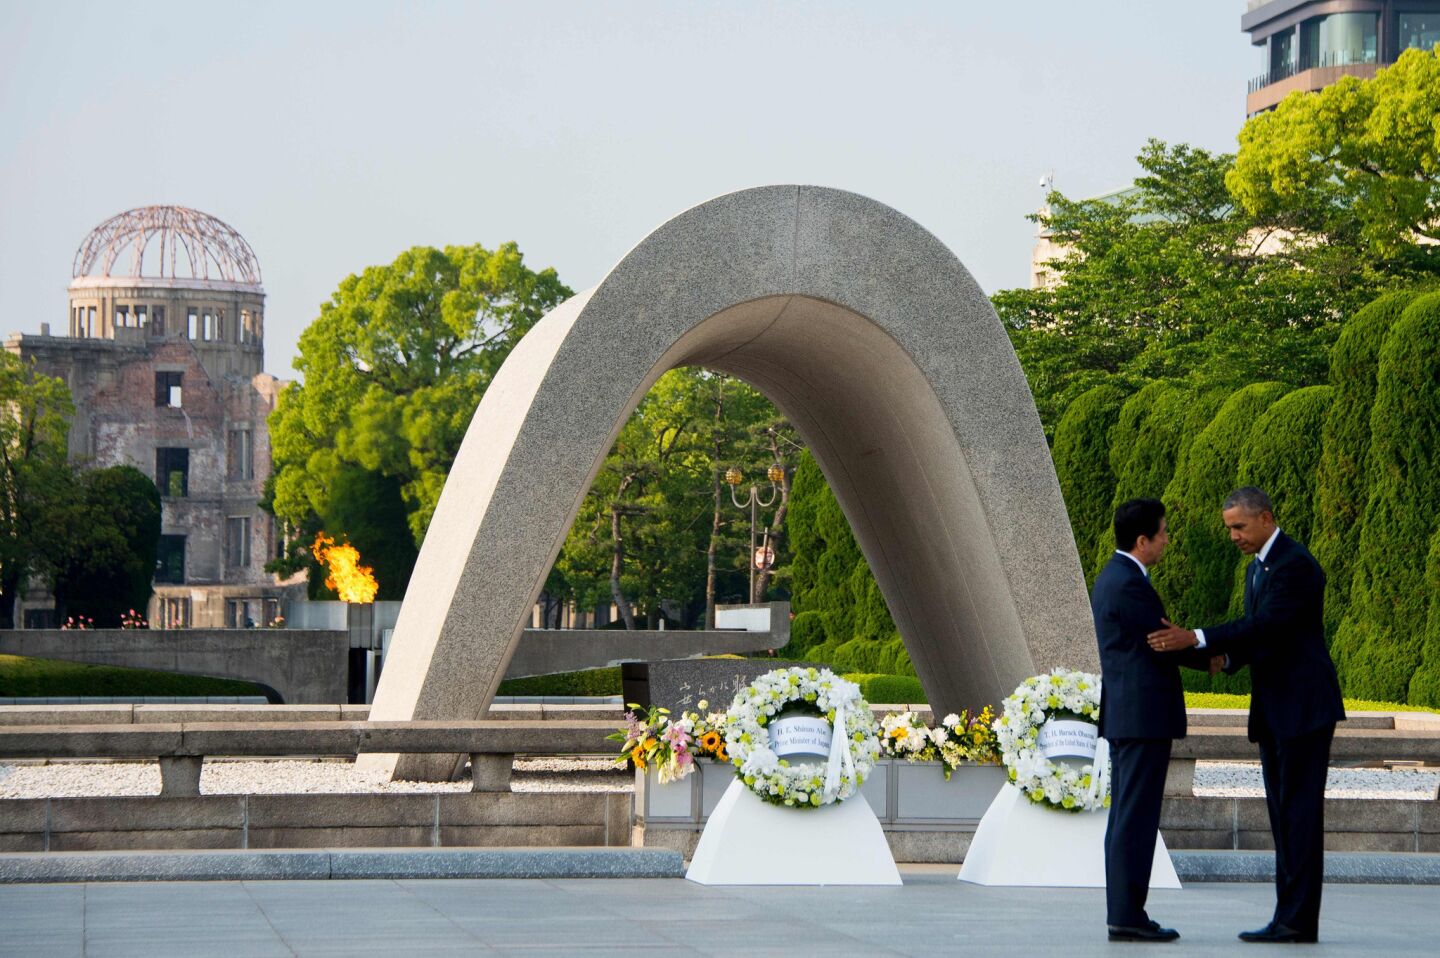 President Obama and Japanese Prime Minister Shinzo Abe shake hands after laying wreaths at Hiroshima Peace Memorial Park.